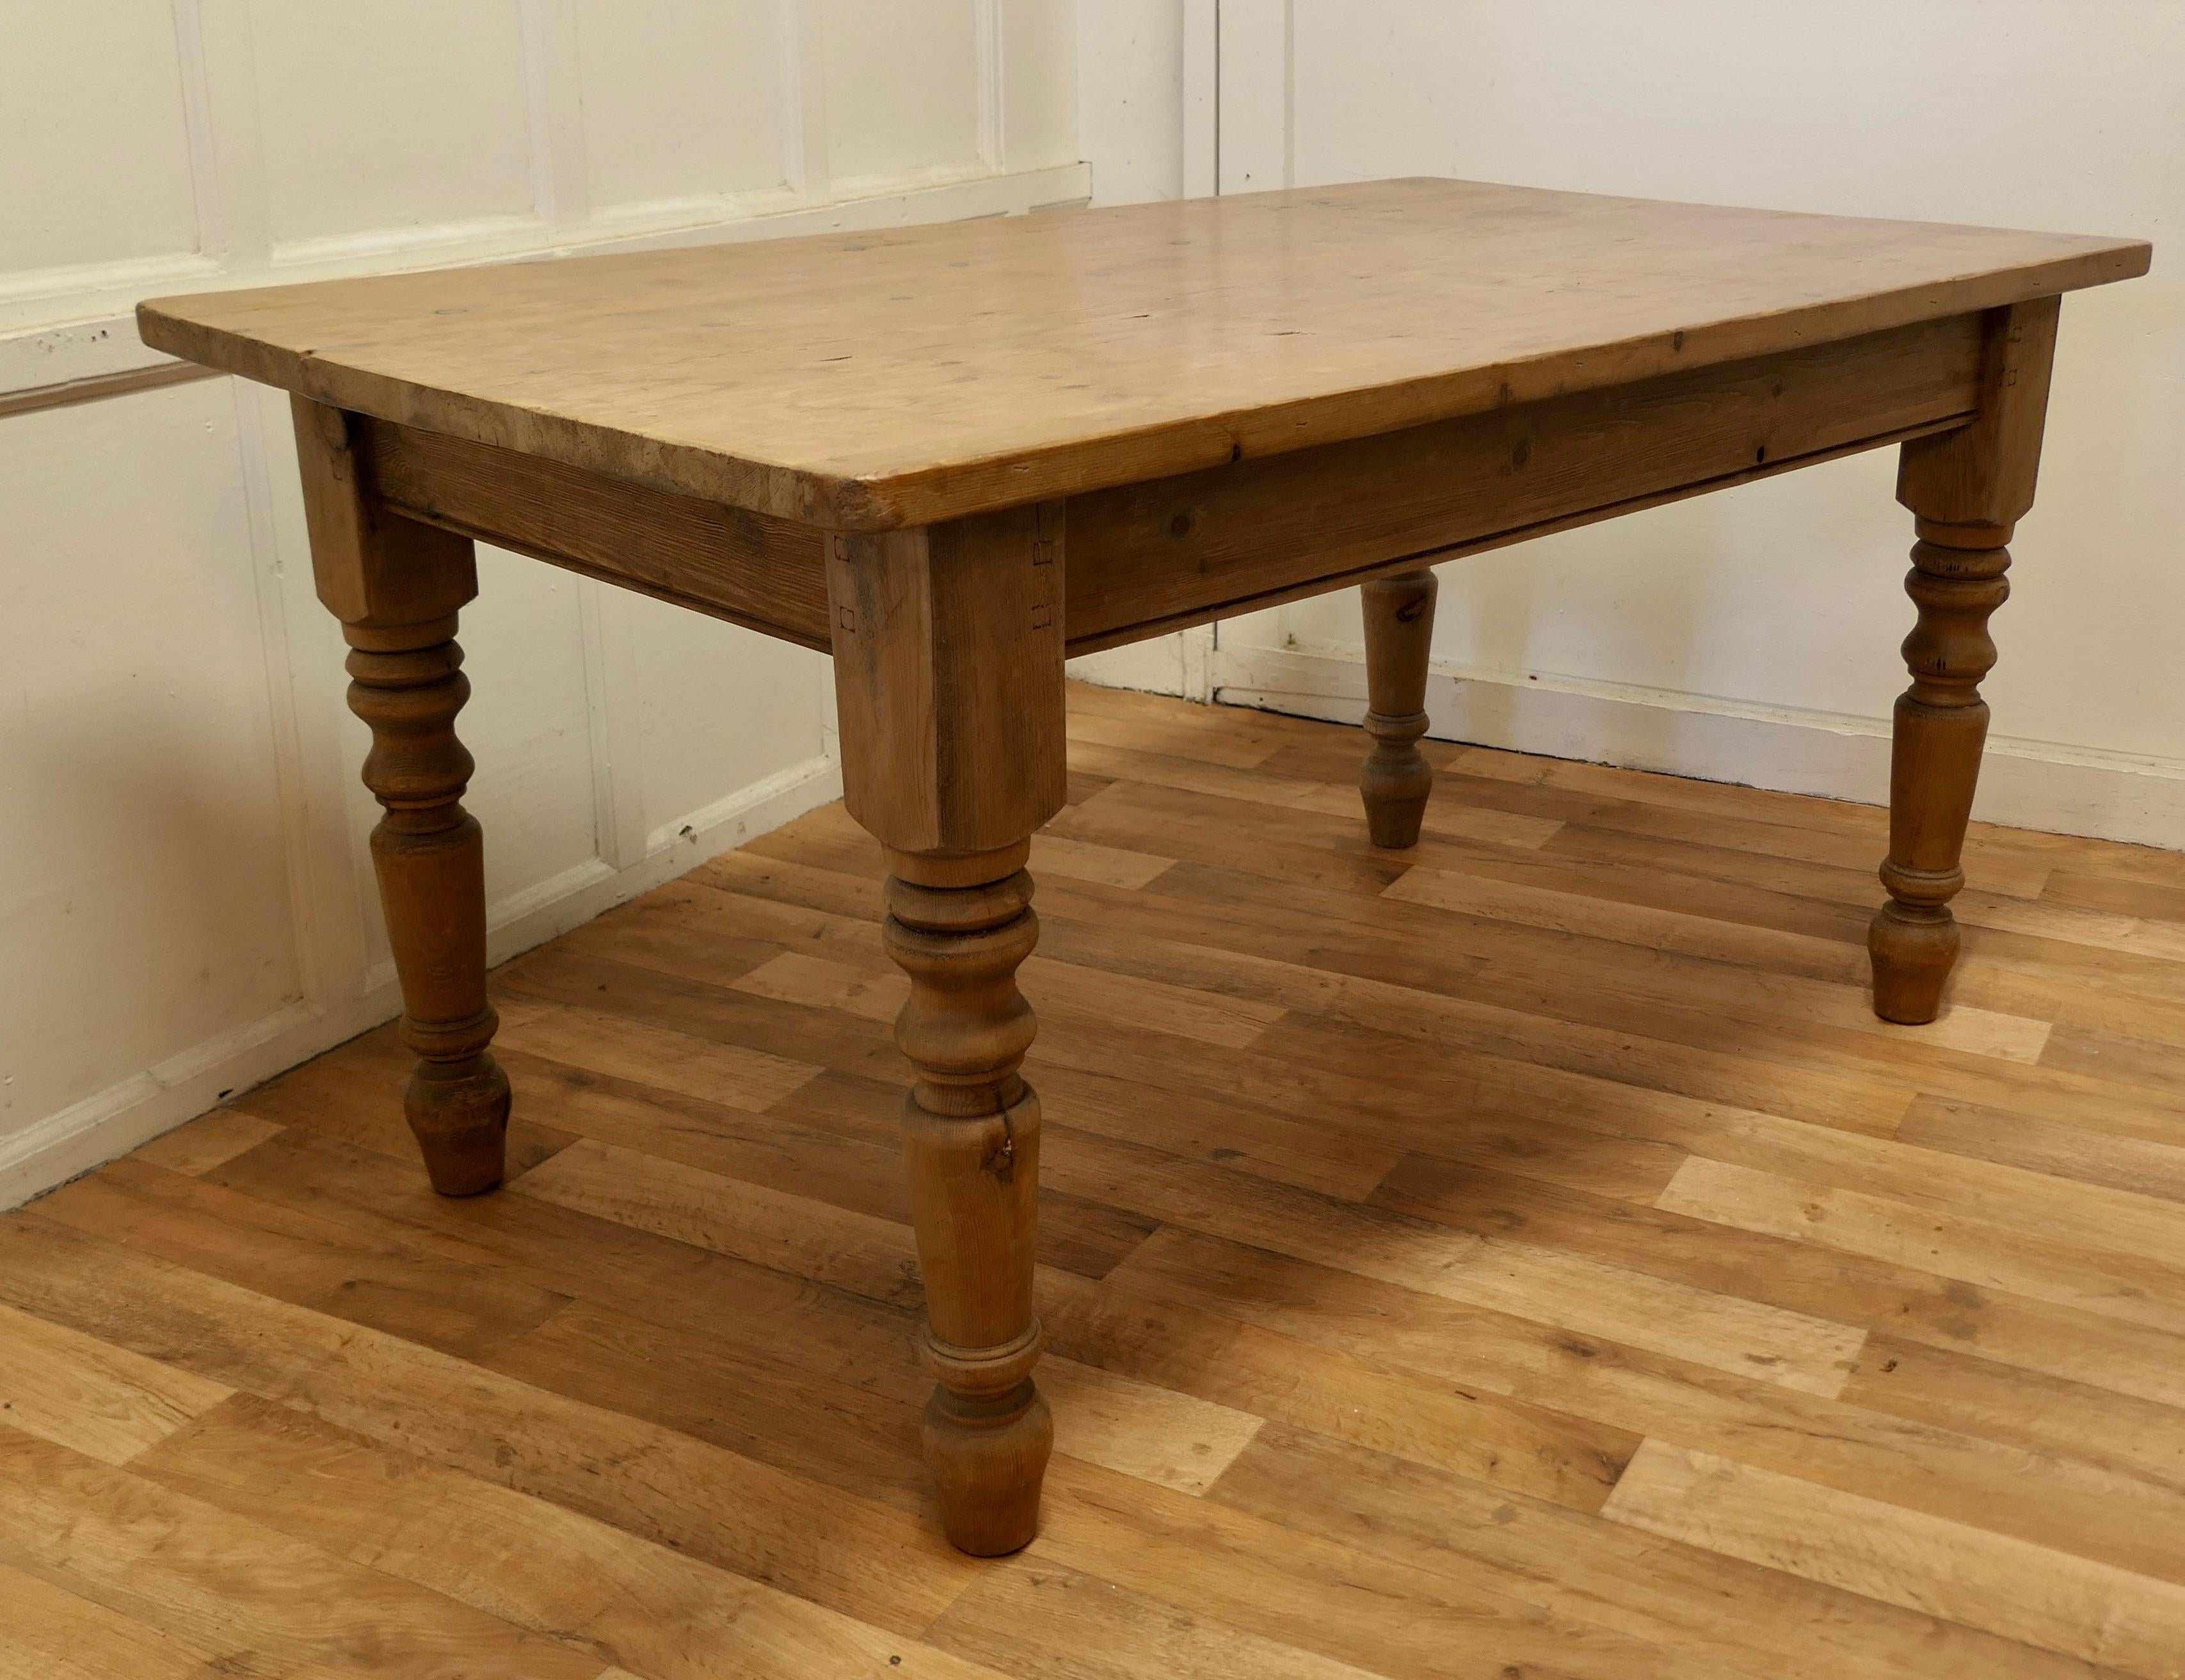 5ft. Long farmhouse pine table 

This is a good Rustic Farmhouse table, it has an old waxed top, the chunky legs are turned
The table though old is very sturdy, it has a few signs of its previous life, it has a rustic appearance, the 1.5” thick